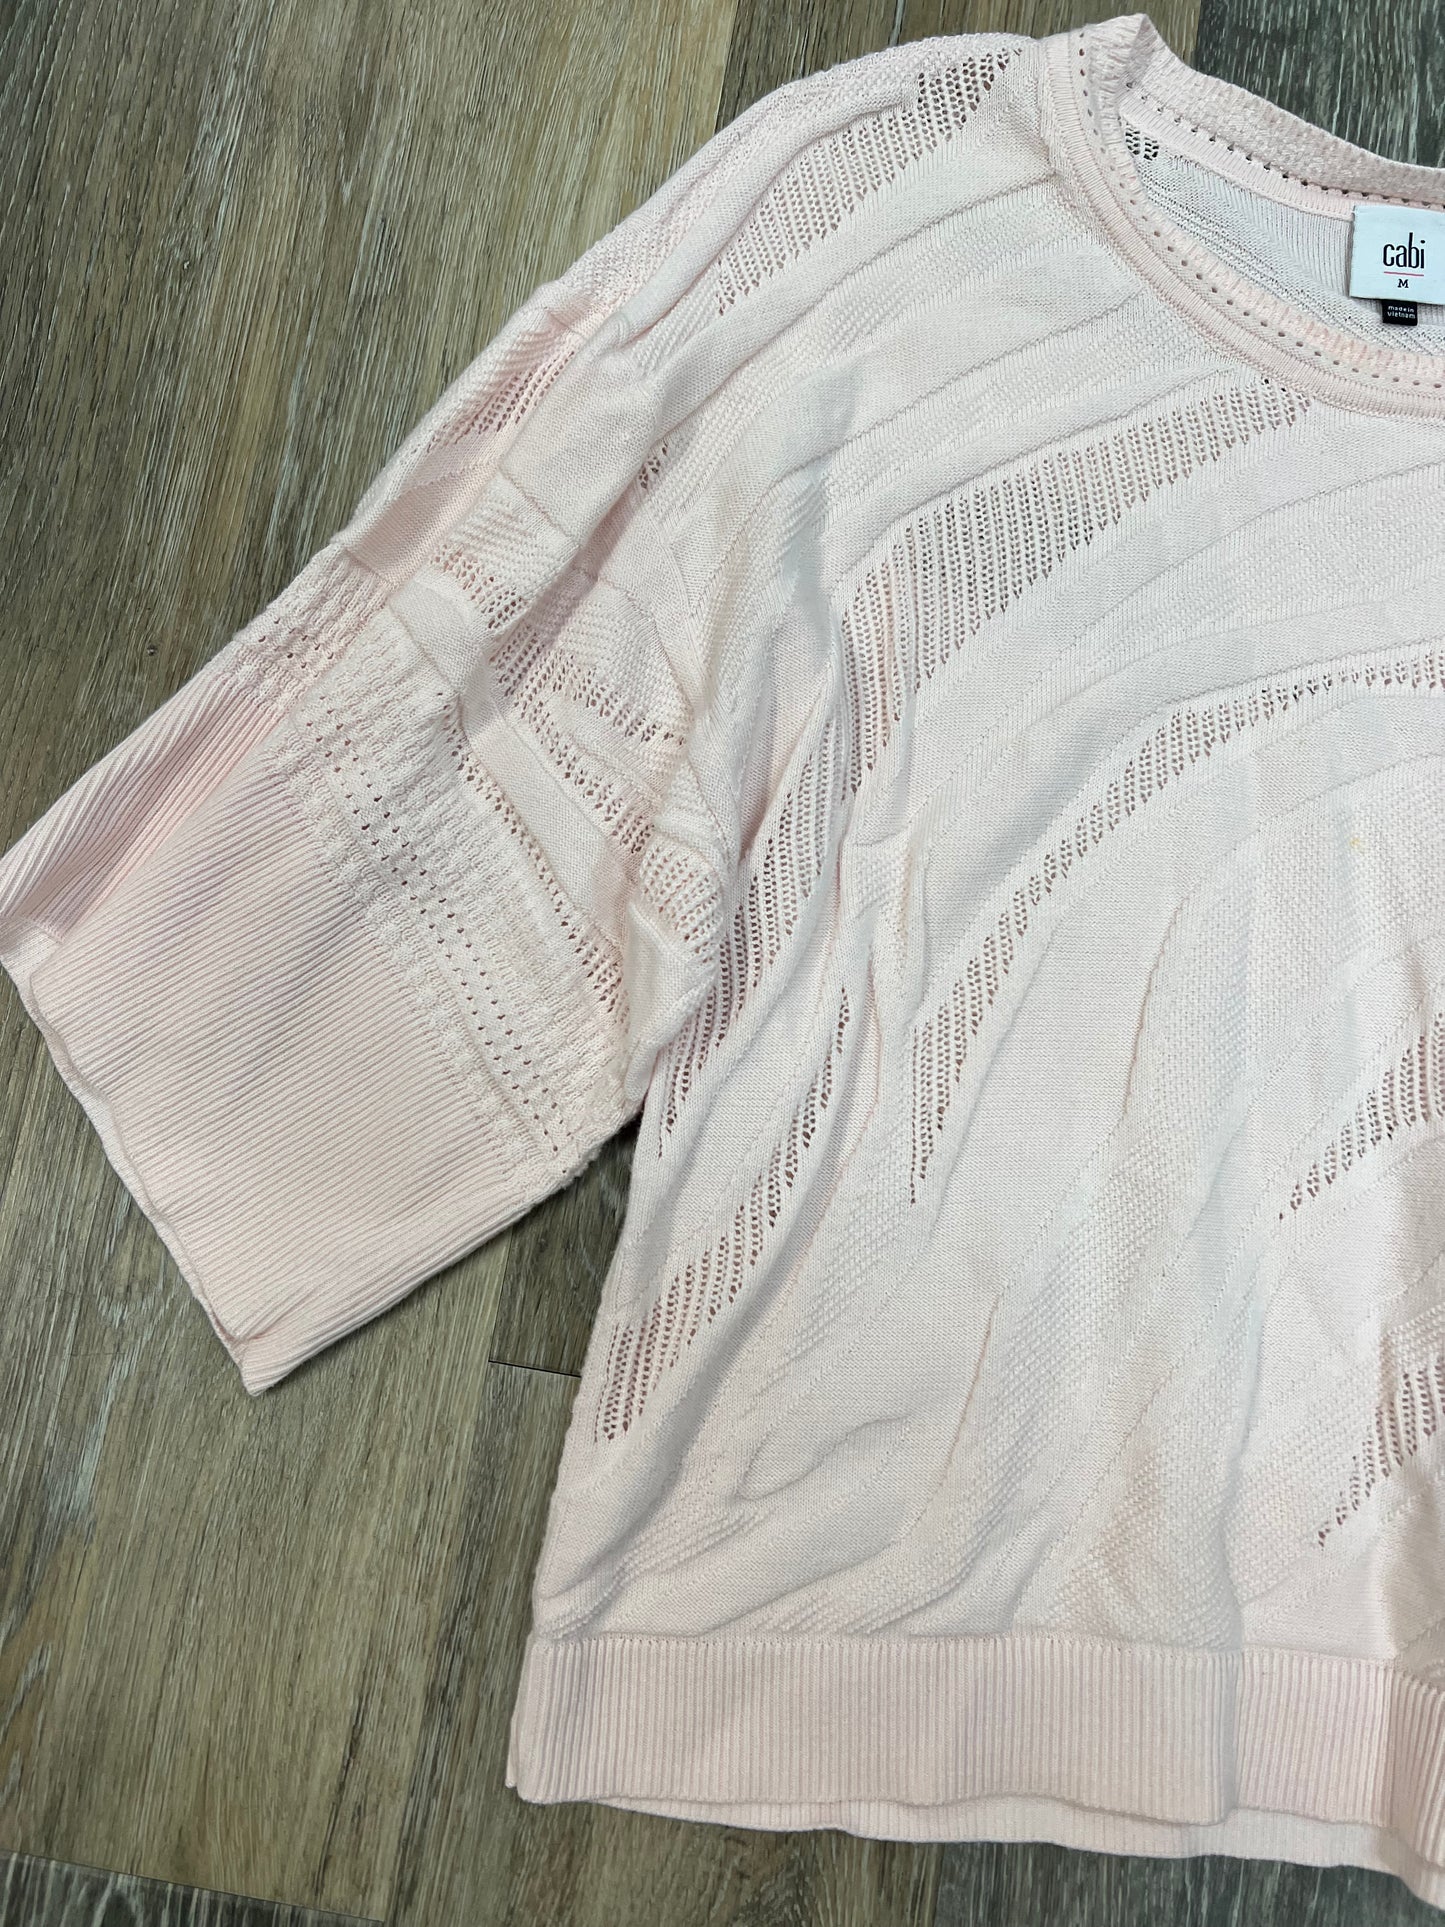 Knit Top Short Sleeve By Cabi  Size: M